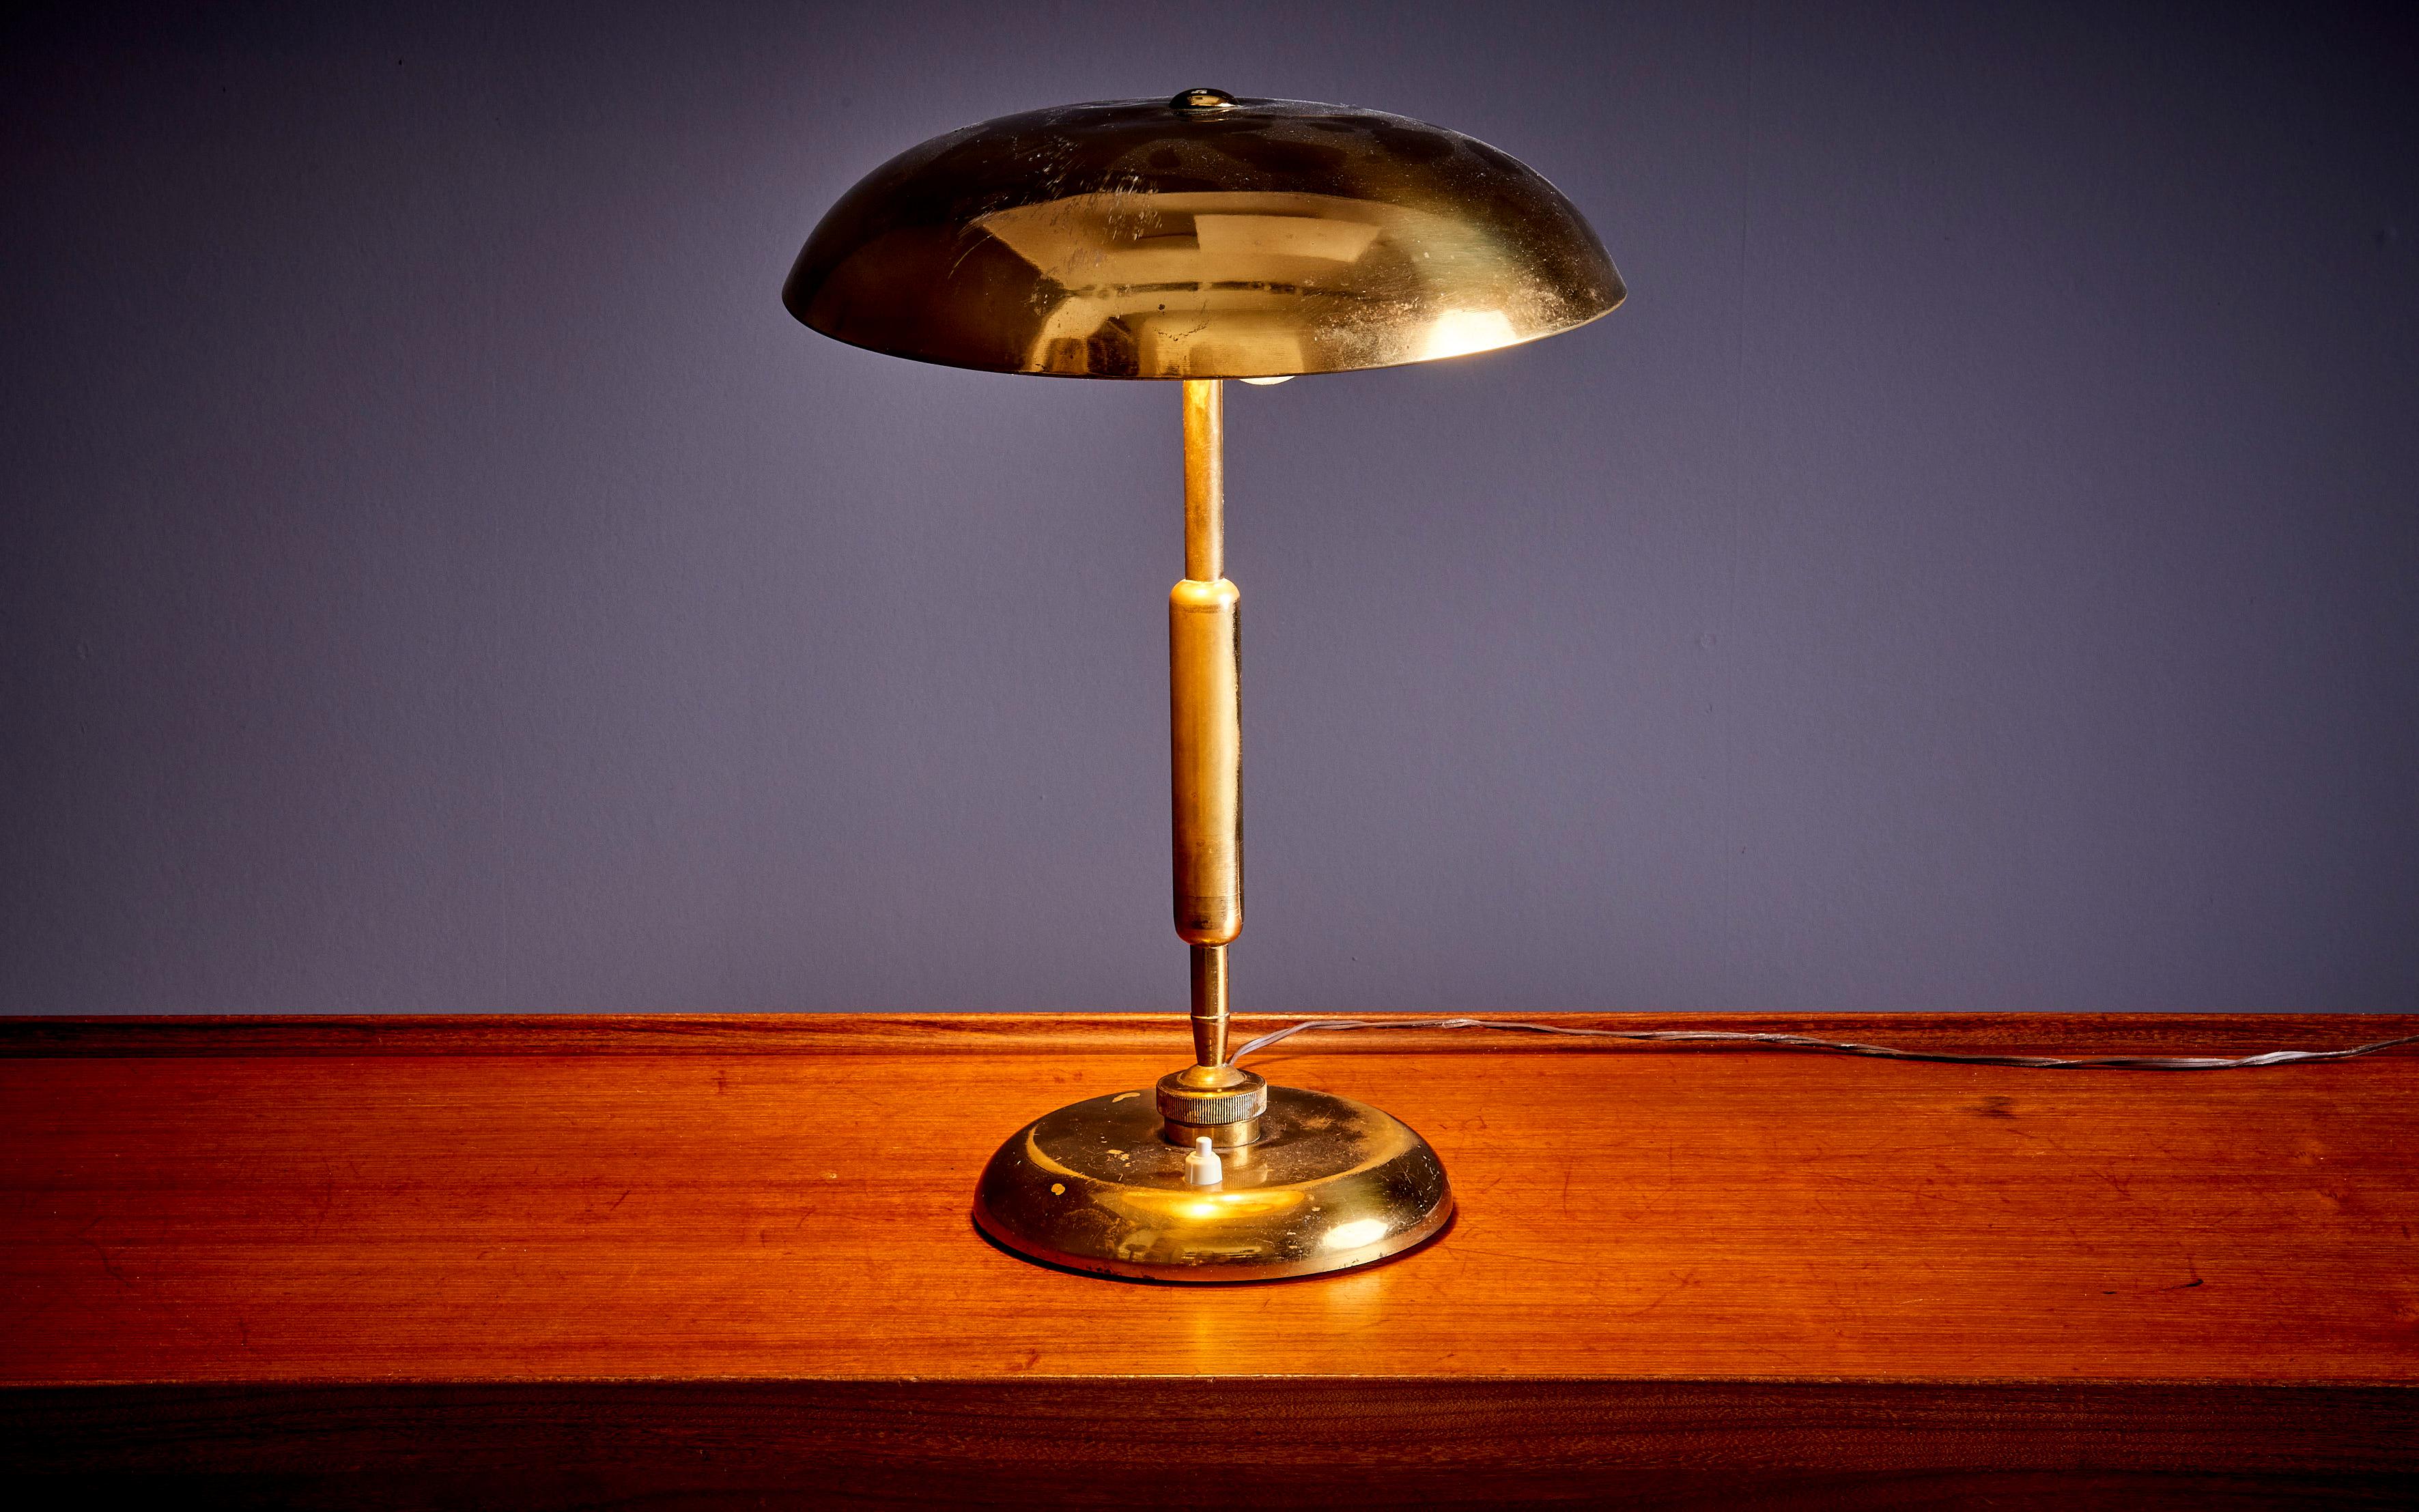 giovanni table lamp